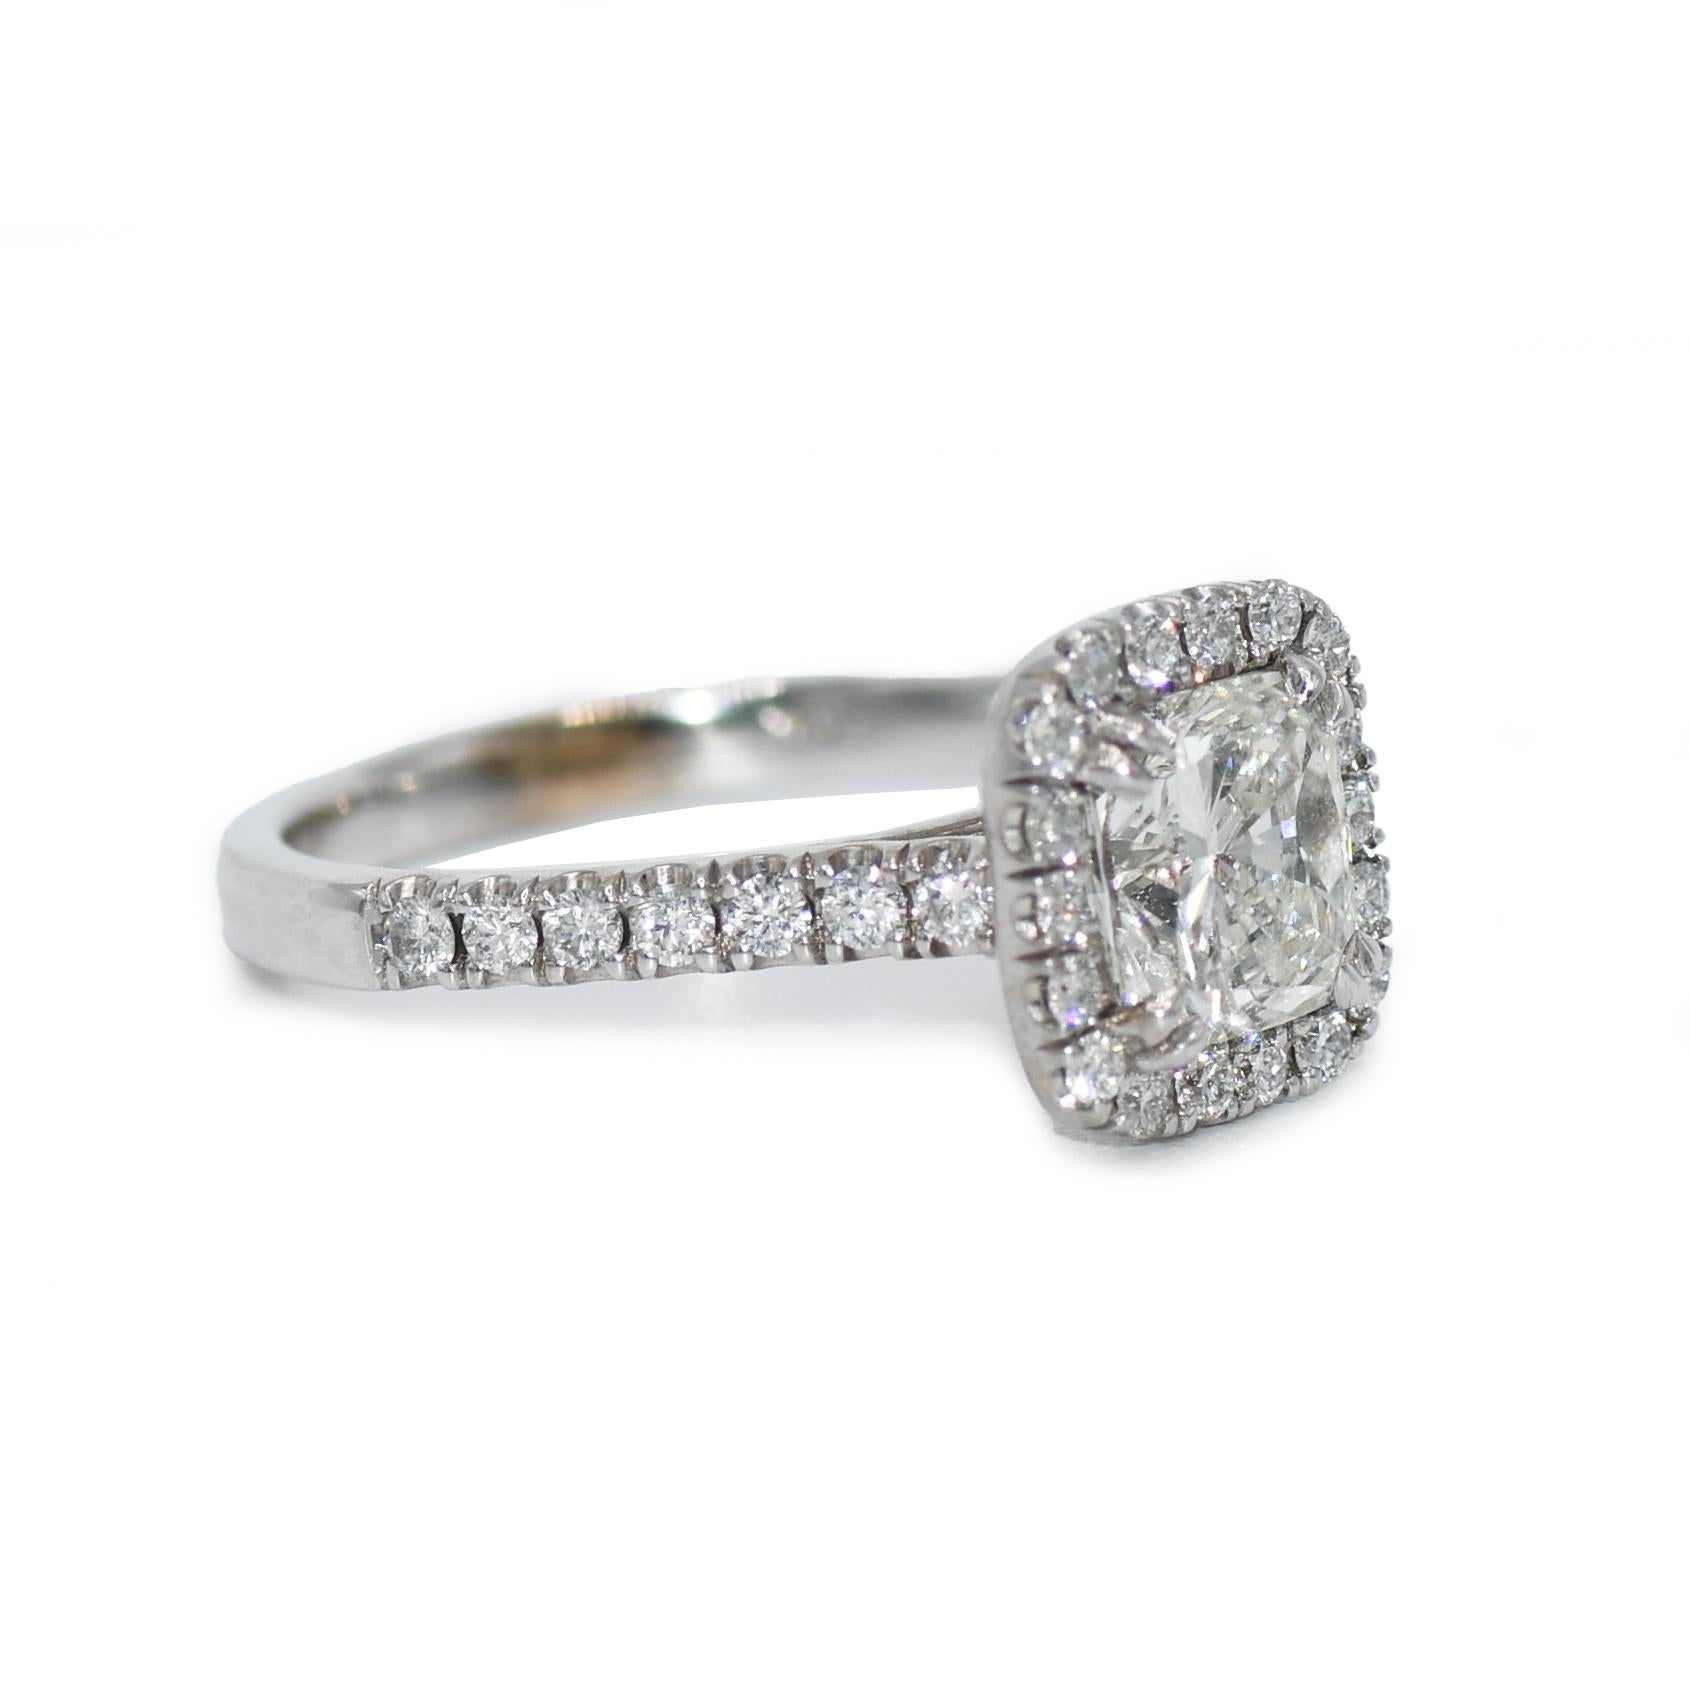 Ladies' engagement ring with square modified brilliant center diamond in 14k white gold setting.
Stamped 14k and weighs 3.6 grams.
The center diamond is K to L color, Vs clarity, 1.50 carats.
The side diamonds are round brilliant cuts, .50 total